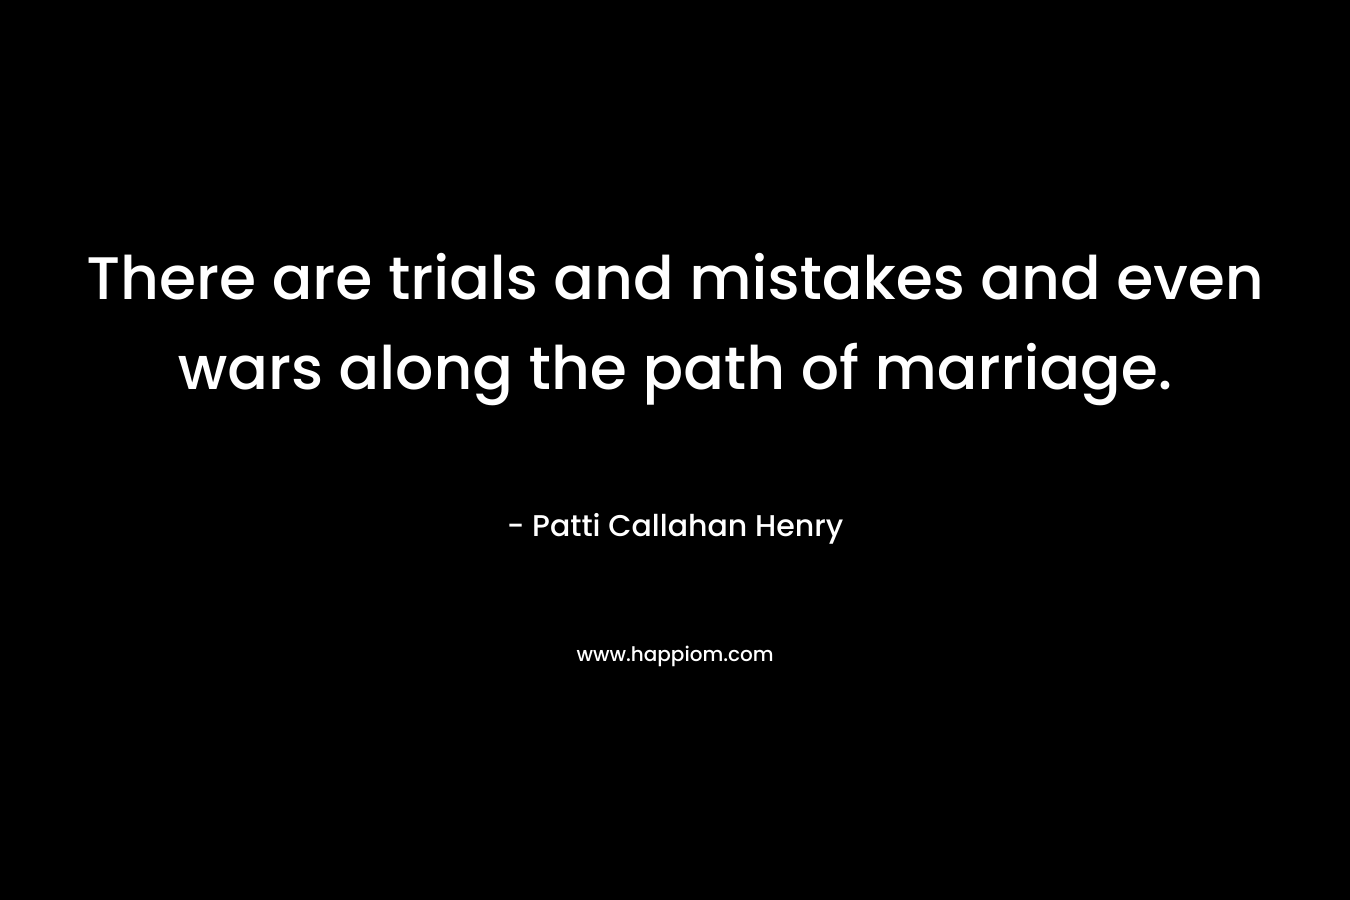 There are trials and mistakes and even wars along the path of marriage.